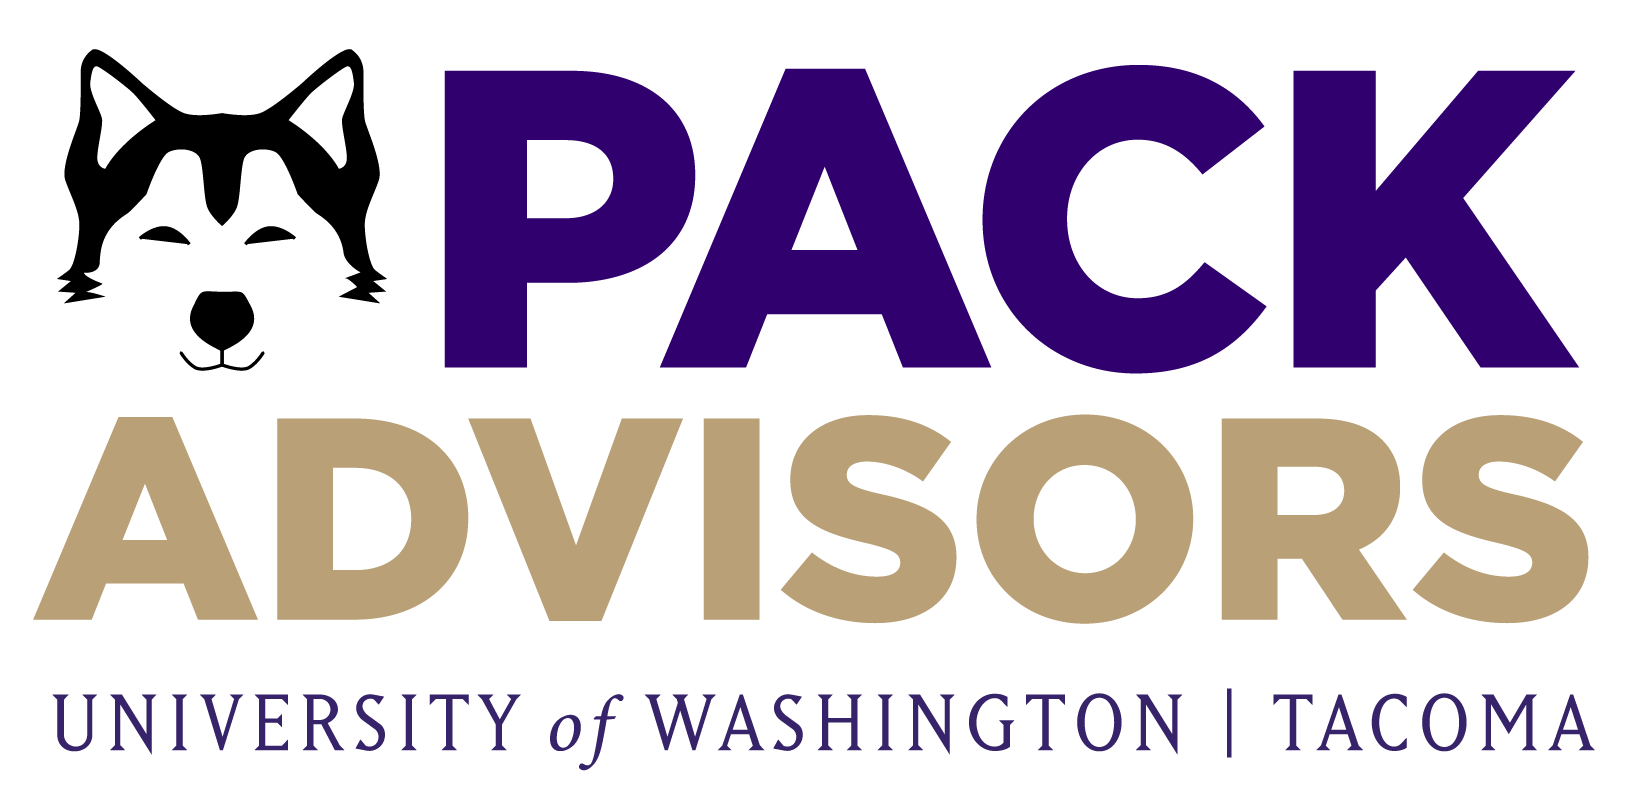 Pack advisor logo. Graphic image of a husky, with words "Pack Advisors"